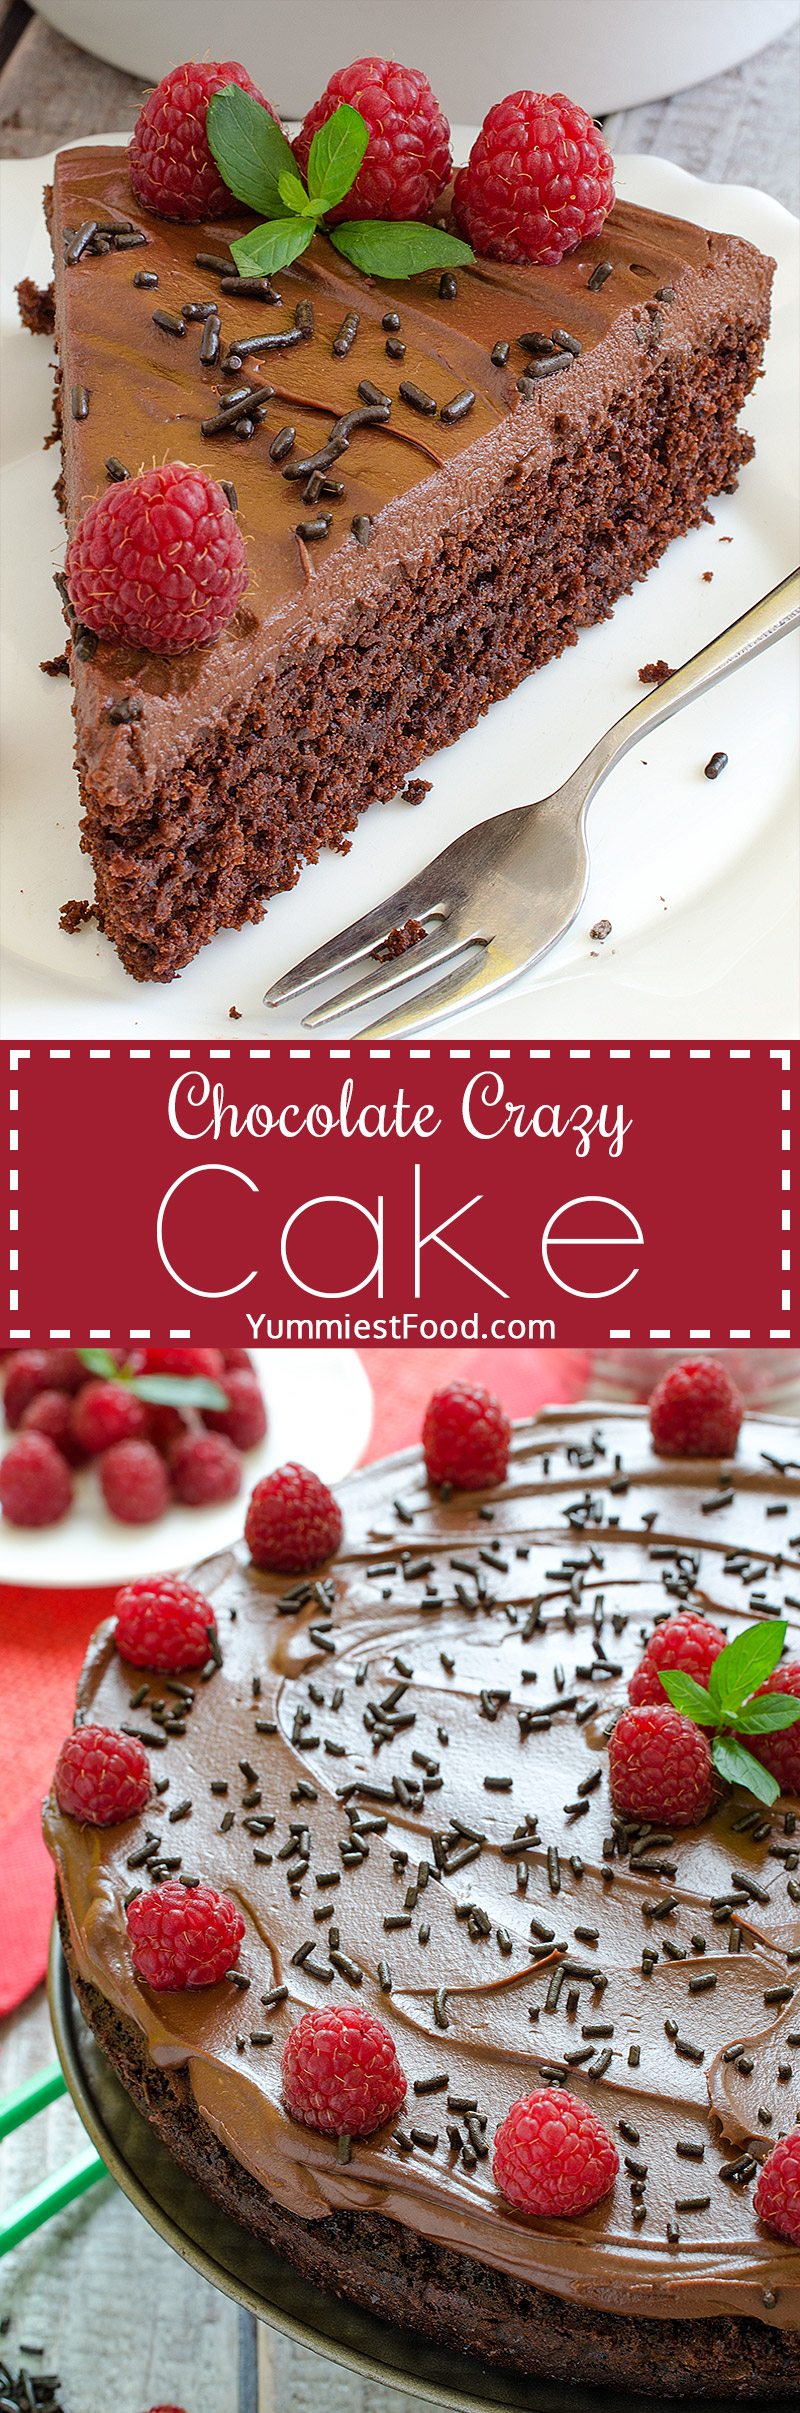 Chocolate Crazy Cake - Light, moist and fluffy! This Chocolate Crazy Cake is the best ever, very delicious and easy to make.